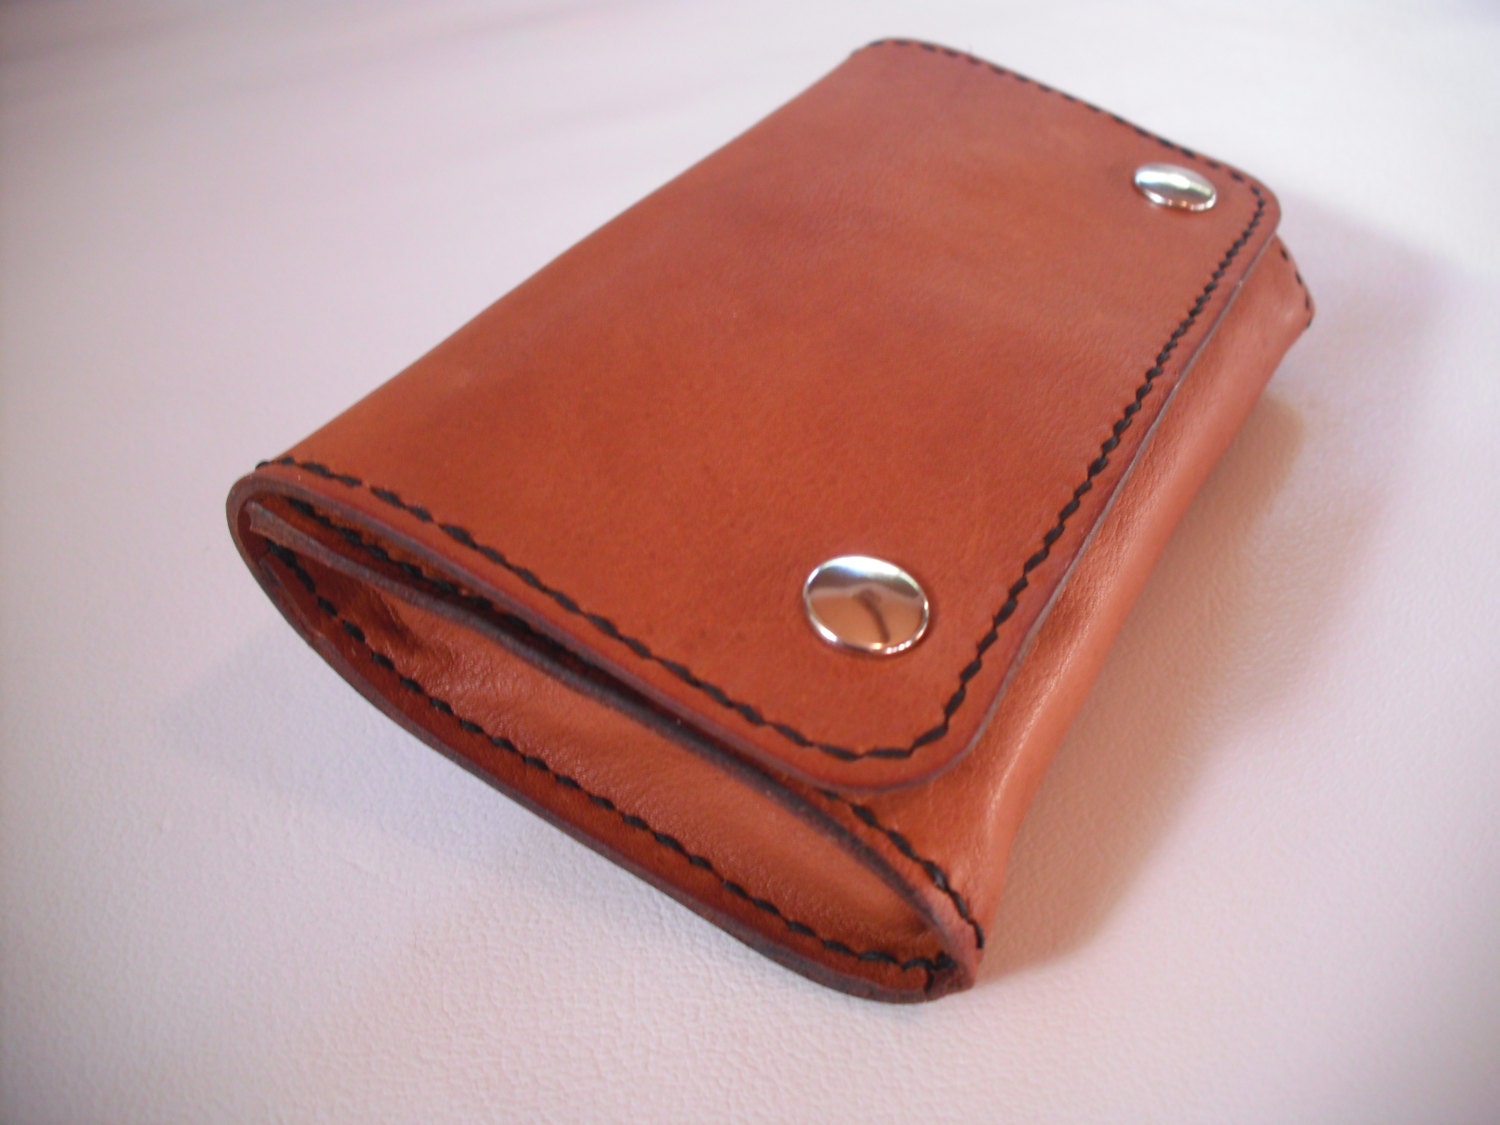 Soft leather tobacco pouch